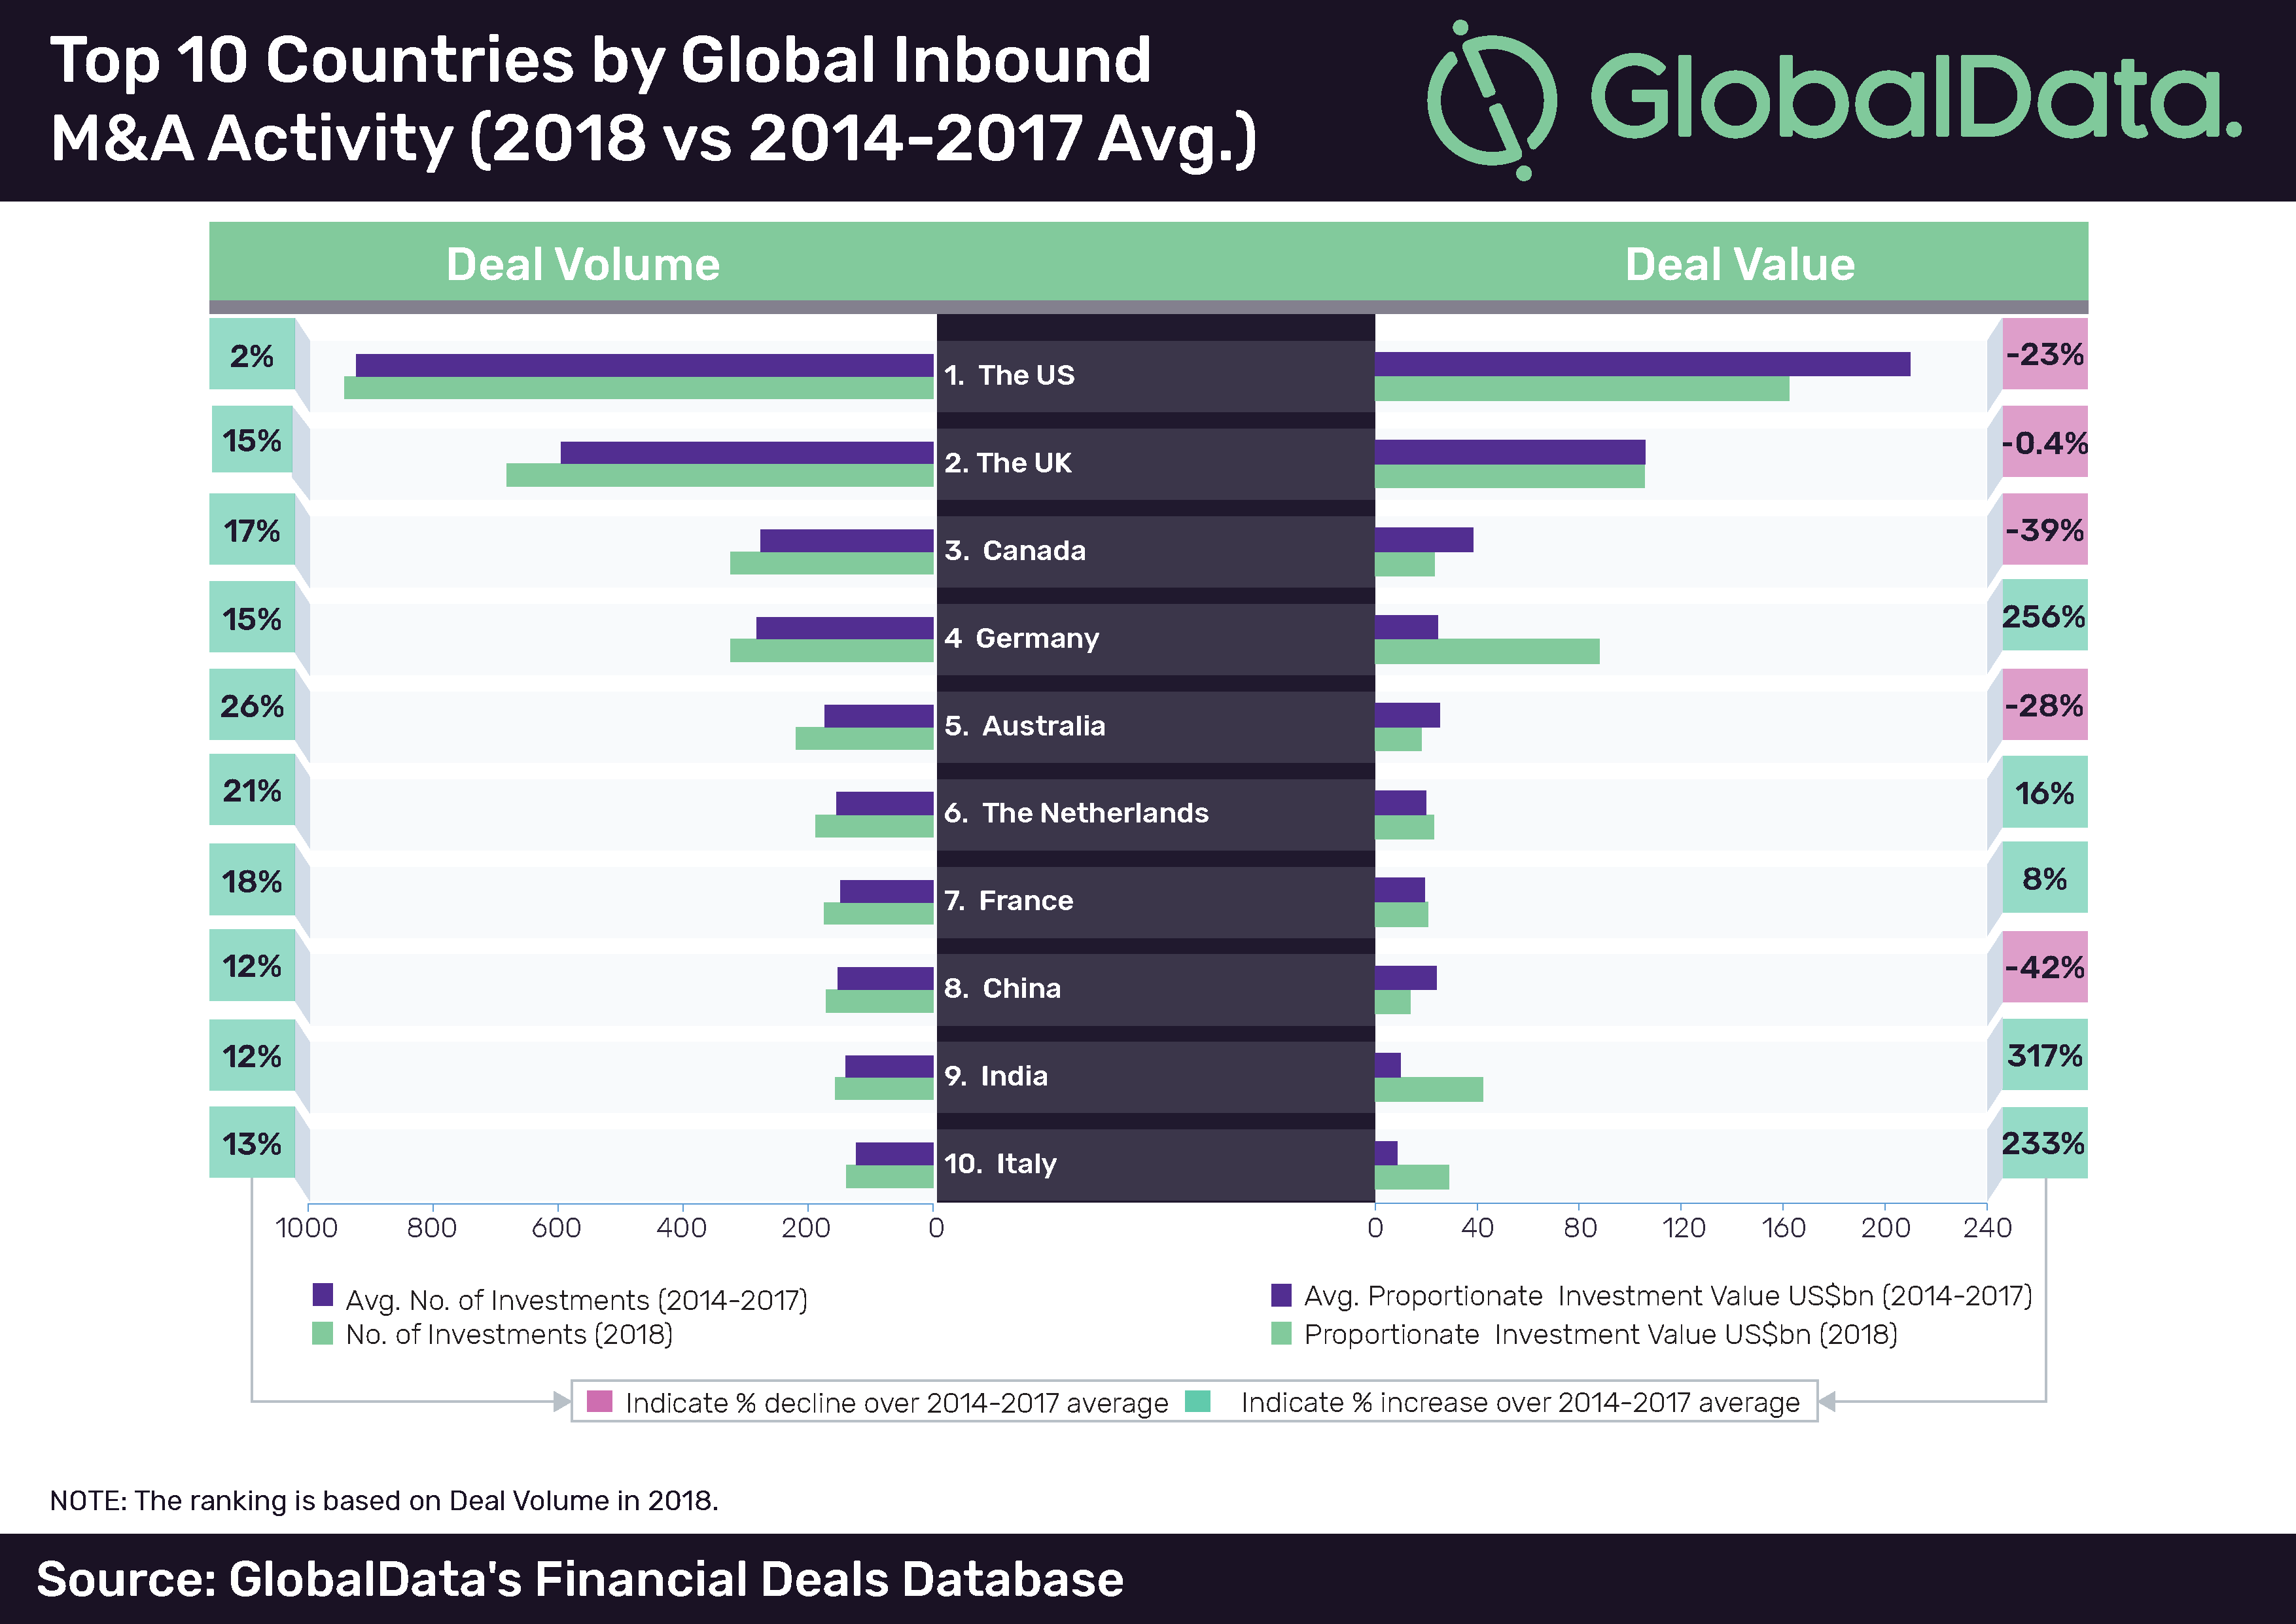 Top 10 Countries by Global Inbound M&A Activity. 